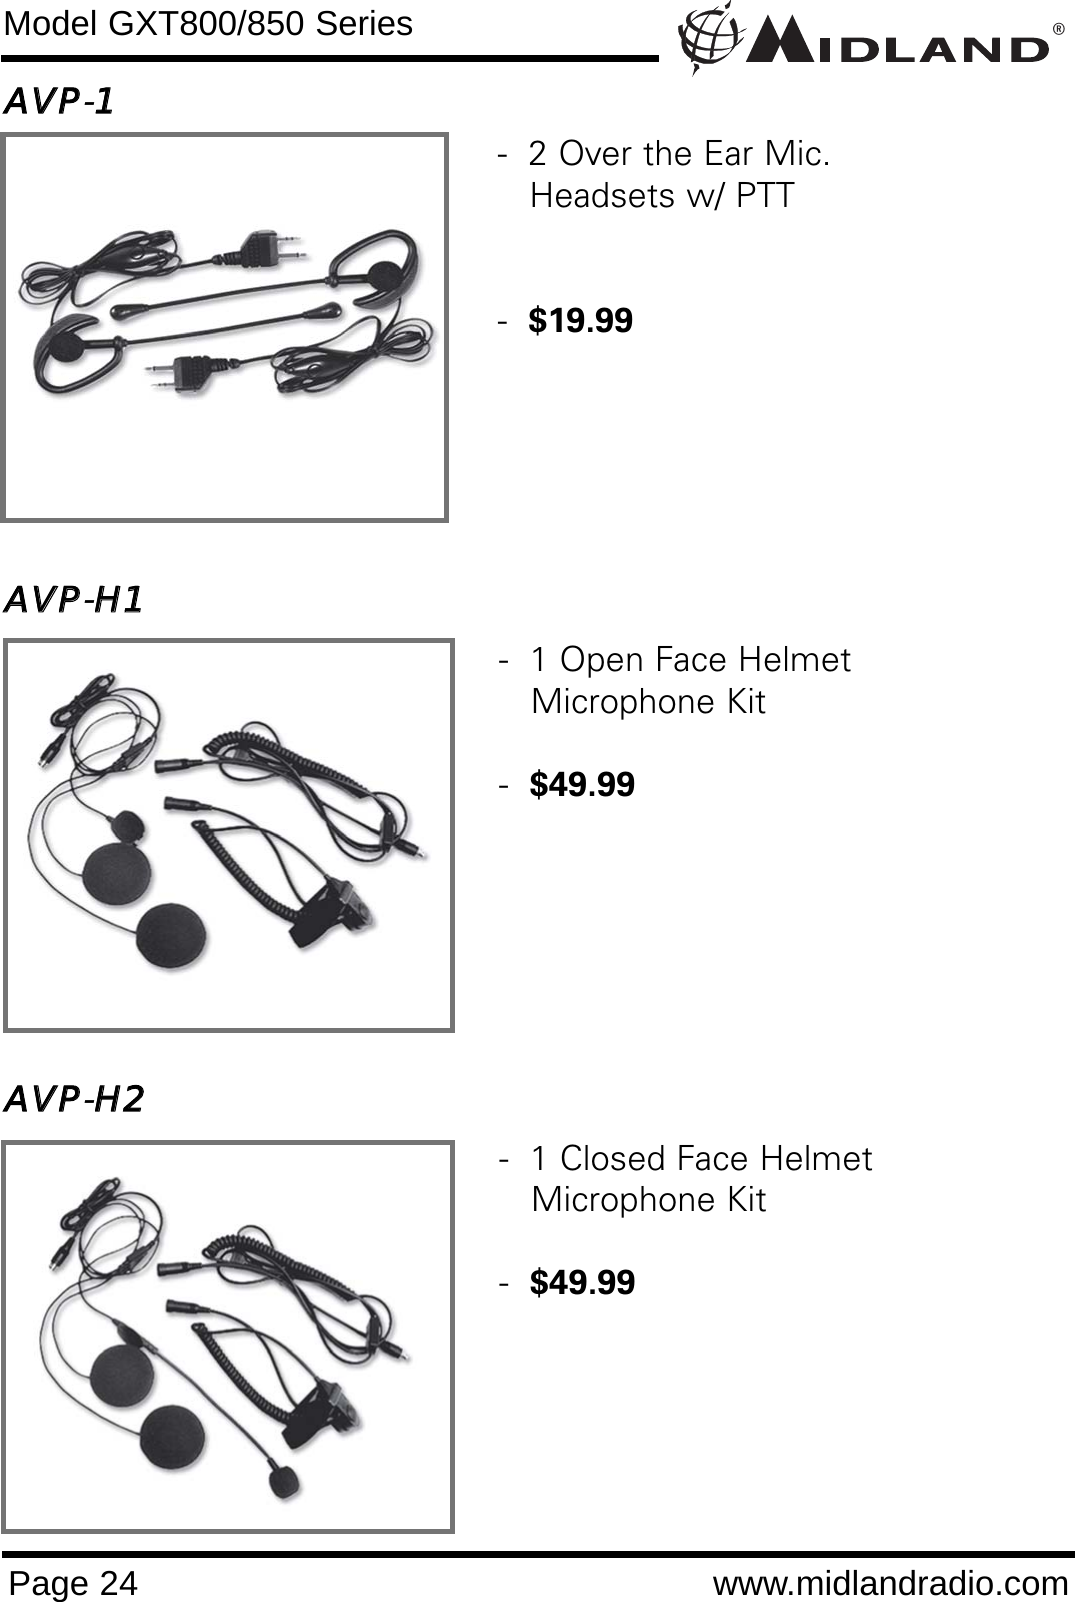 AAVVPP-11AAVVPP-HH11AAVVPP-HH22®Page 24 www.midlandradio.comModel GXT800/850 Series-  1 Open Face Helmet Microphone Kit-  $49.99-  1 Closed Face HelmetMicrophone Kit-  $49.99-  2 Over the Ear Mic. Headsets w/ PTT-  $19.99